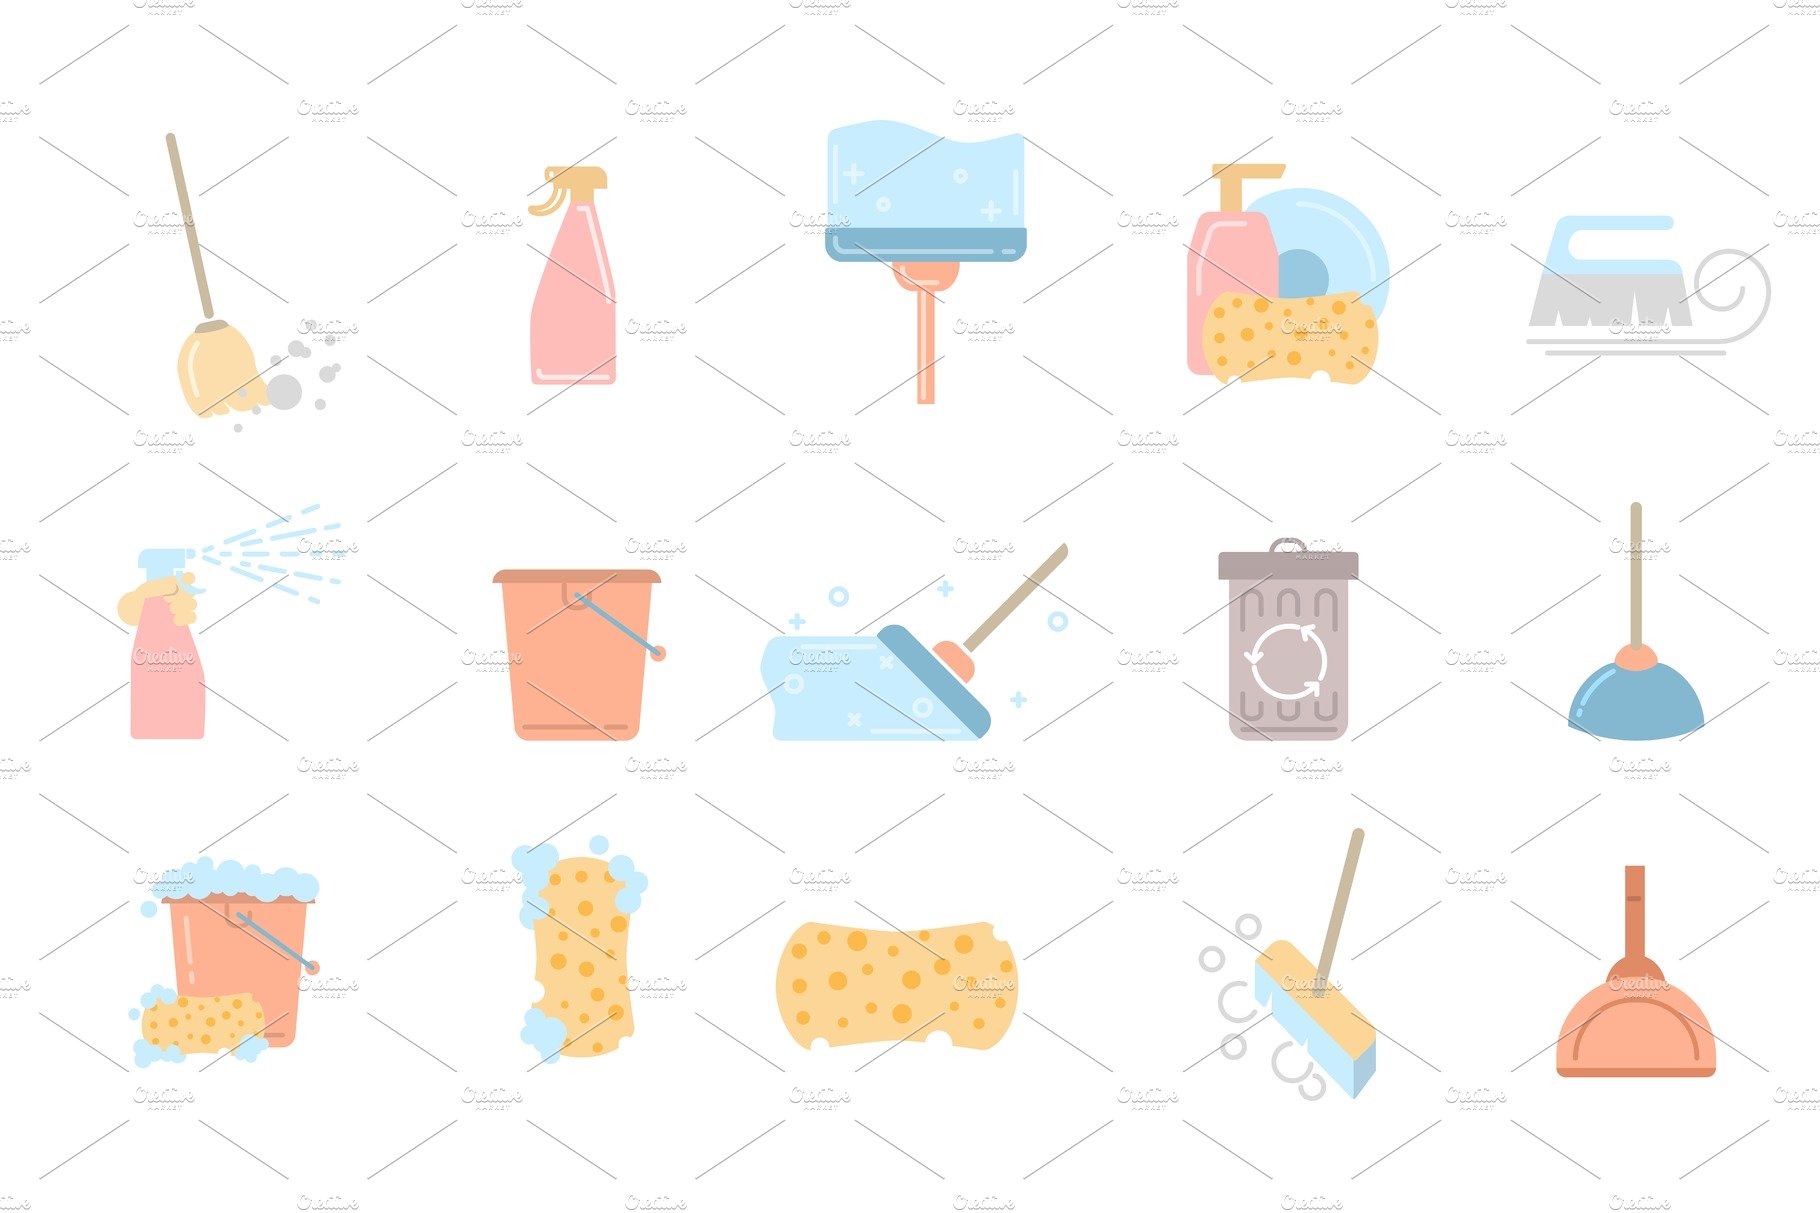 Set of cleaning service flat icons and symbols cover image.